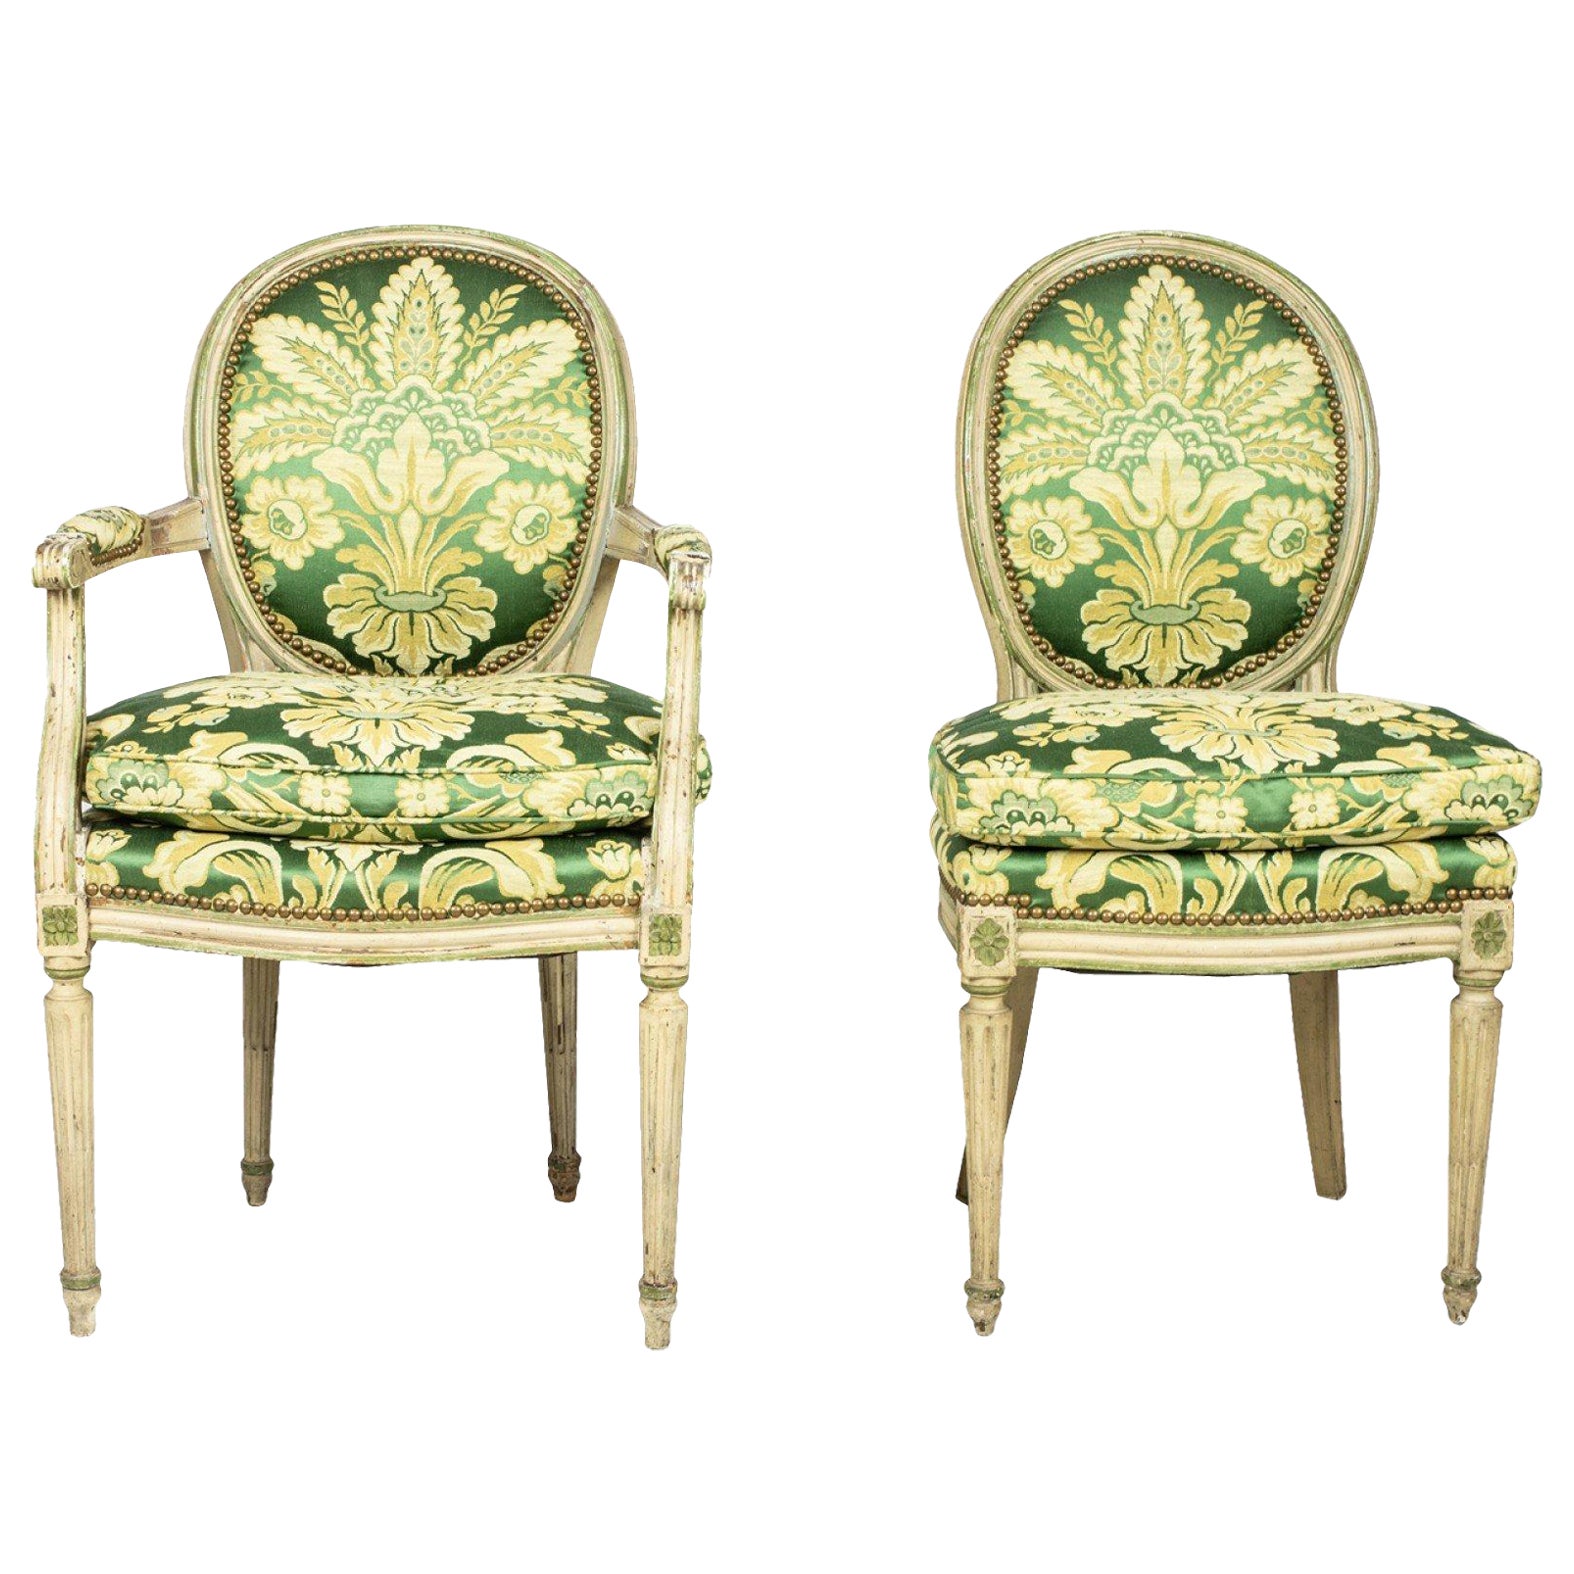 Set of 12 Louis XVI-Style Painted Green Damask Upholstered Dining Chairs